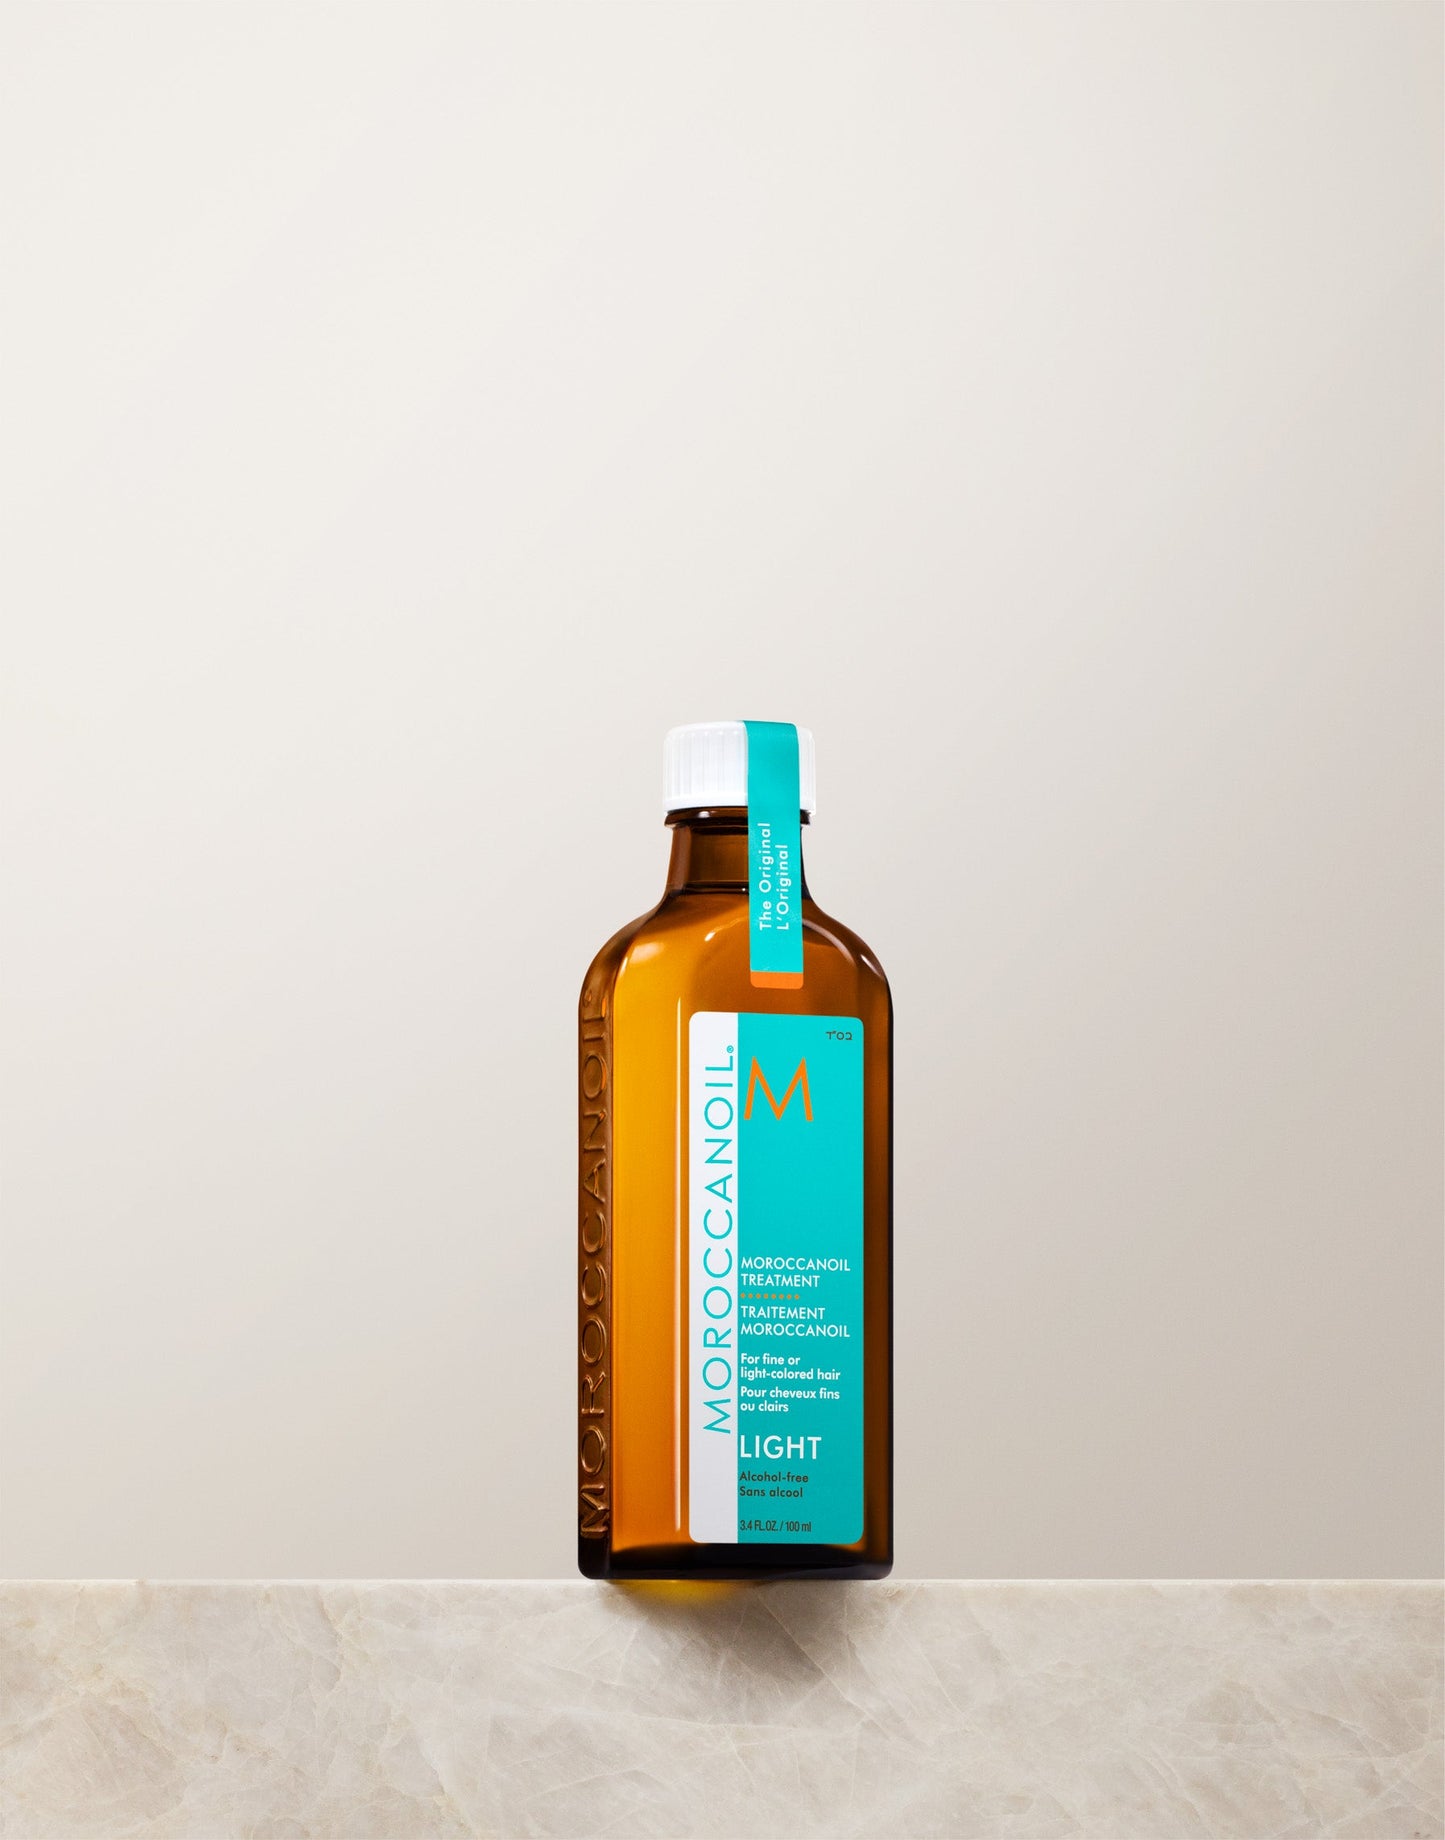 Moroccanoil Treatment Light + Free 10ml Color Care Shampoo And Conditioner Samples